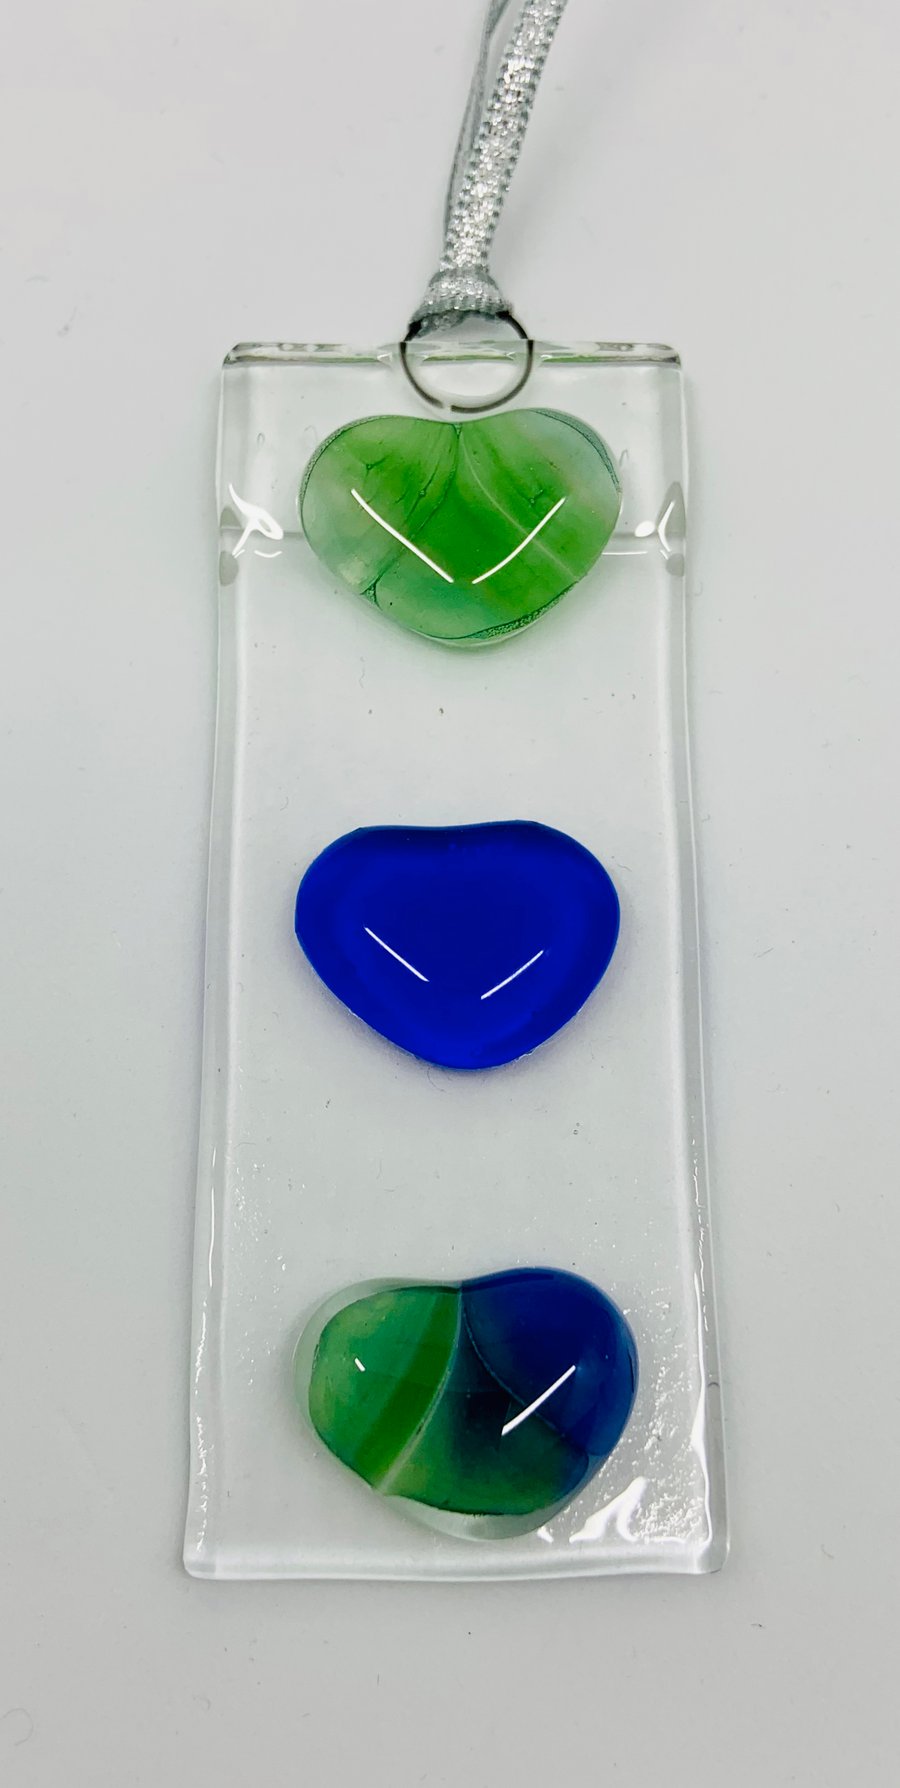 Fused Glass Hanging Sun Catcher featuring hand enamel painted glass hearts